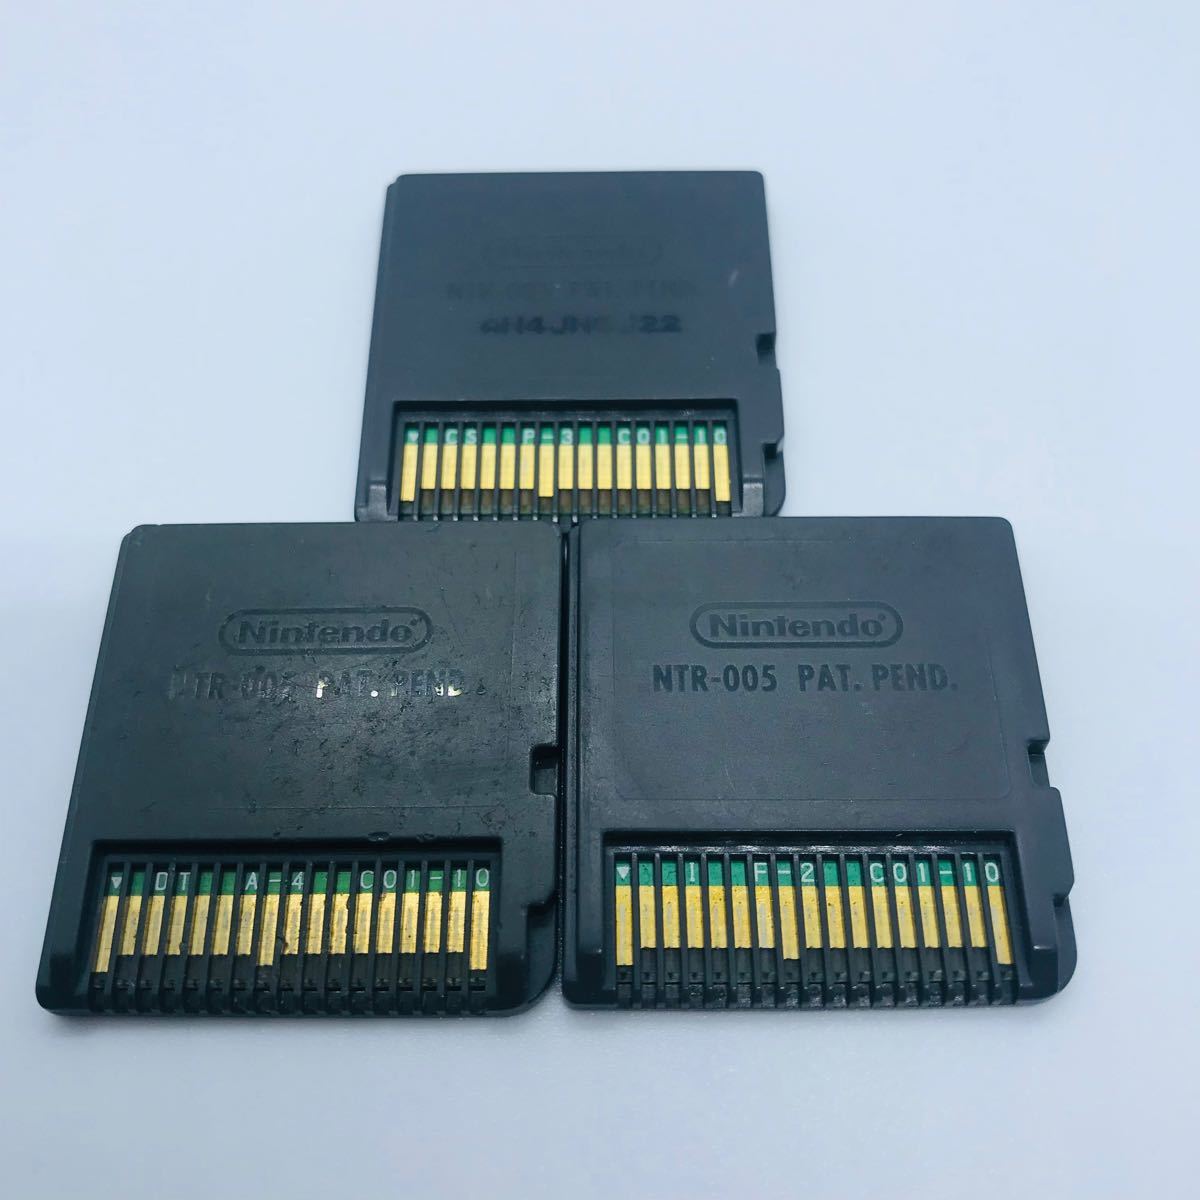 DSソフト3本まとめ売り